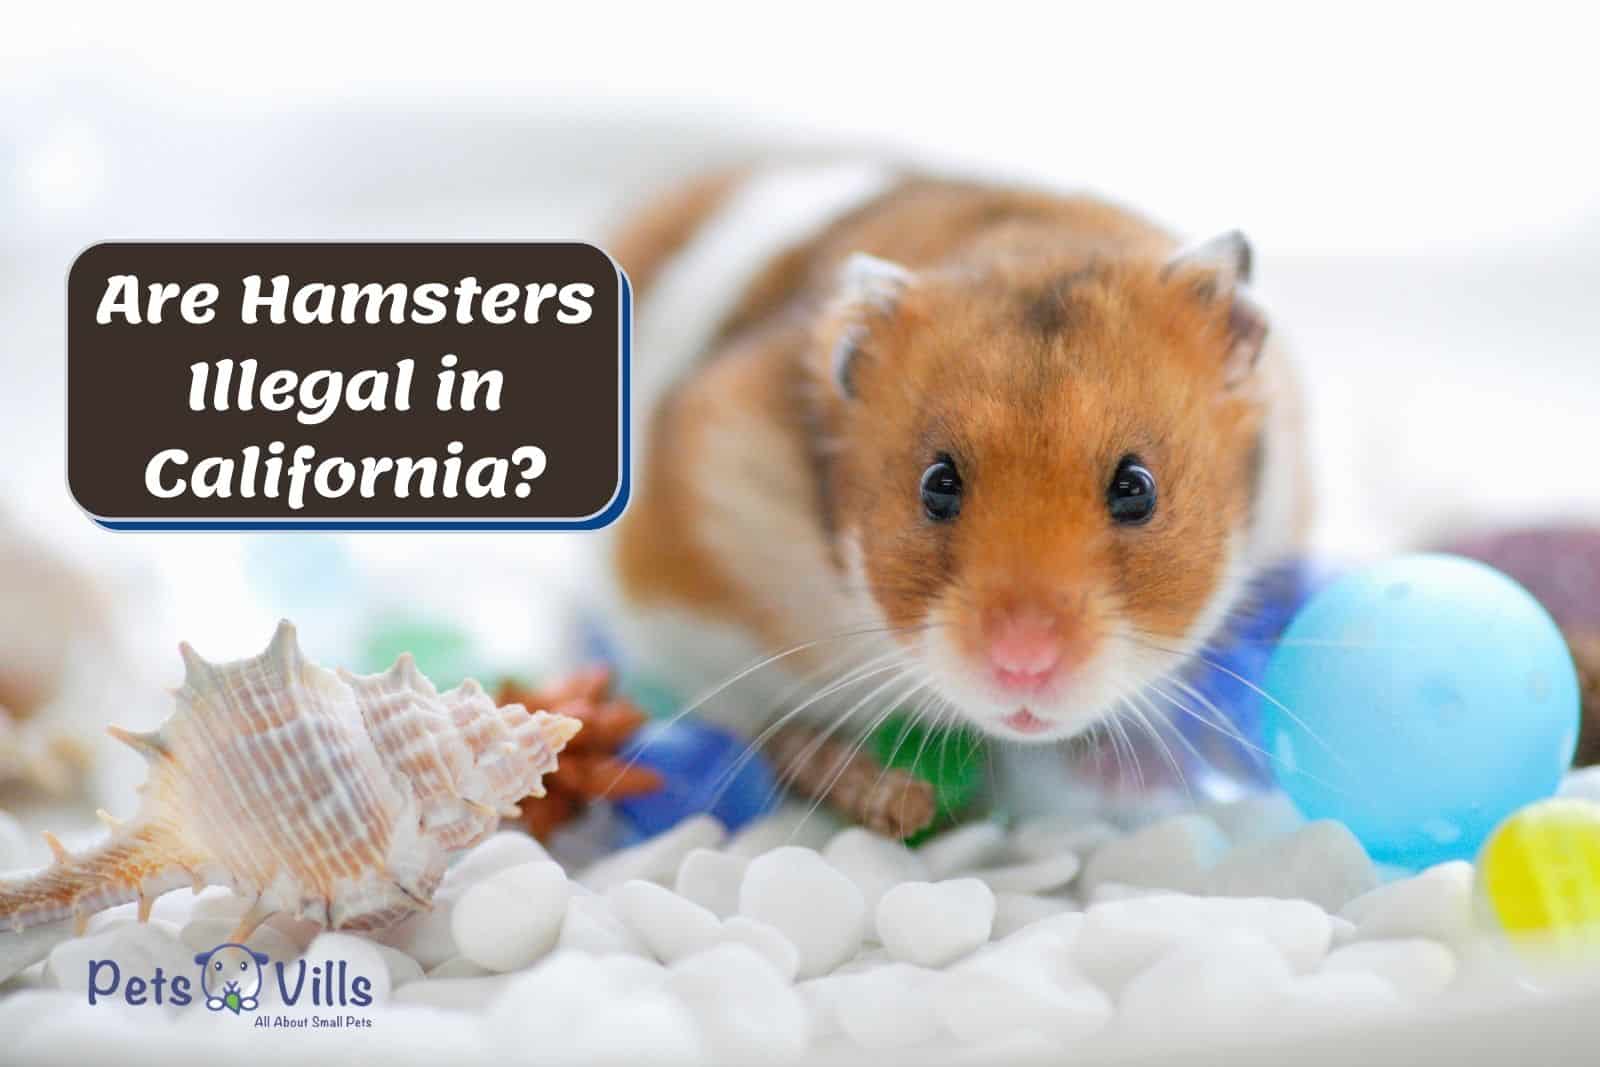 cute hamster beside are hamsters illegal in california poster